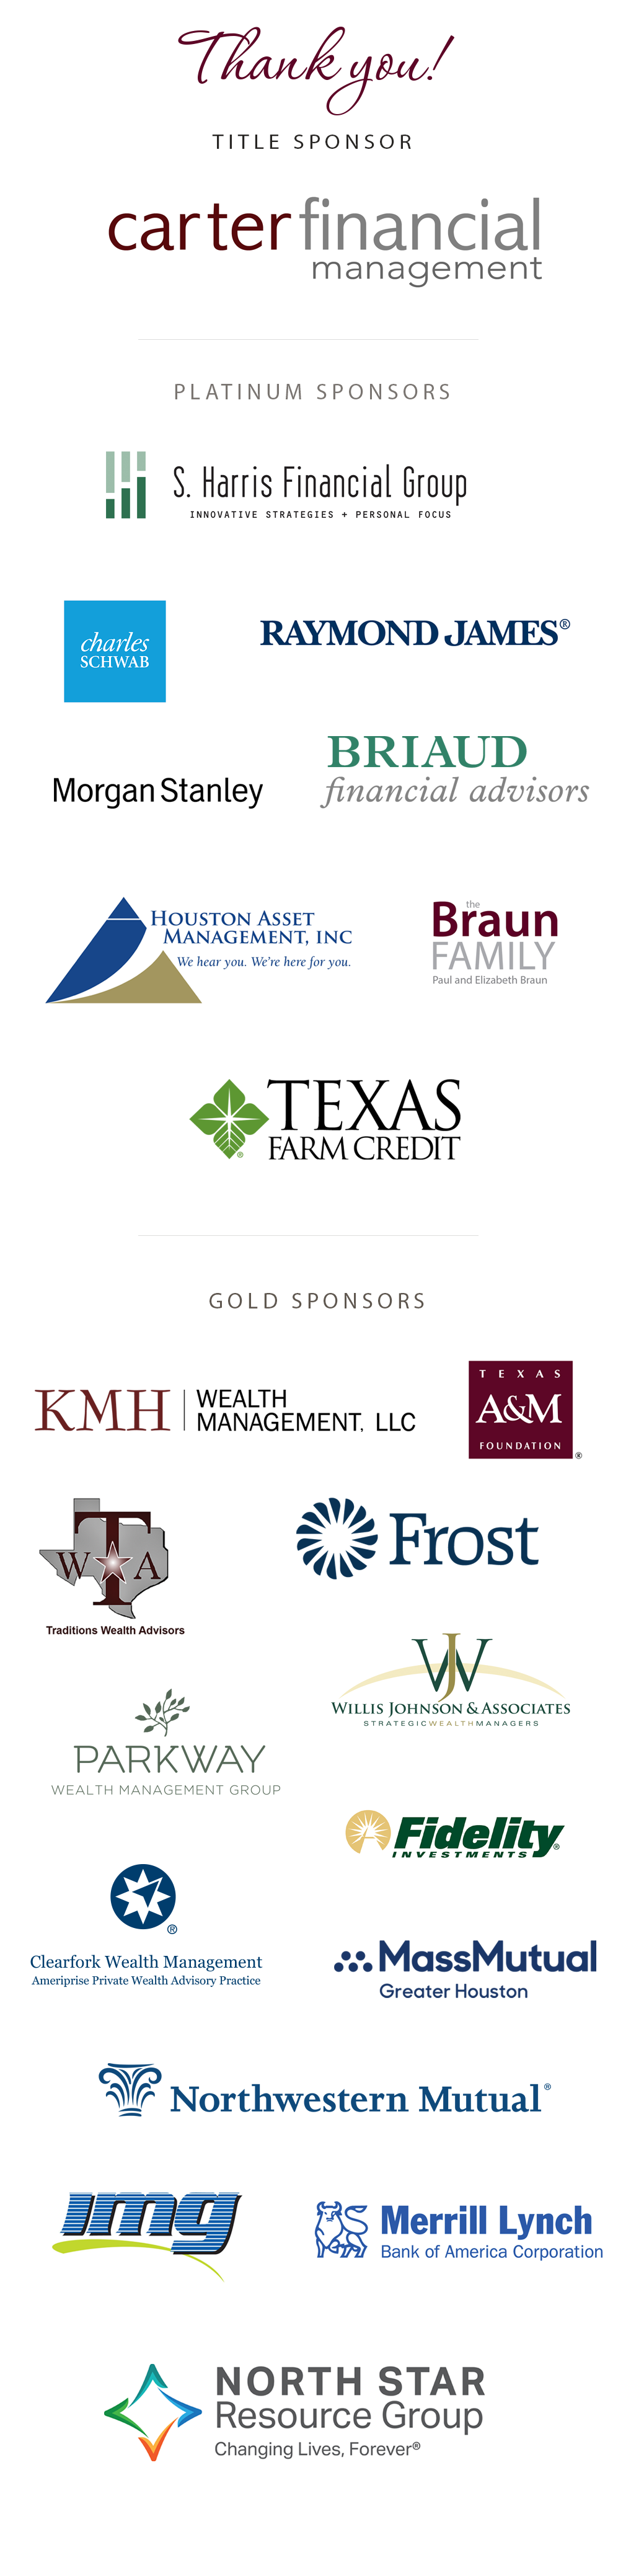 Thank you to our 2019 Conference Sponsors!